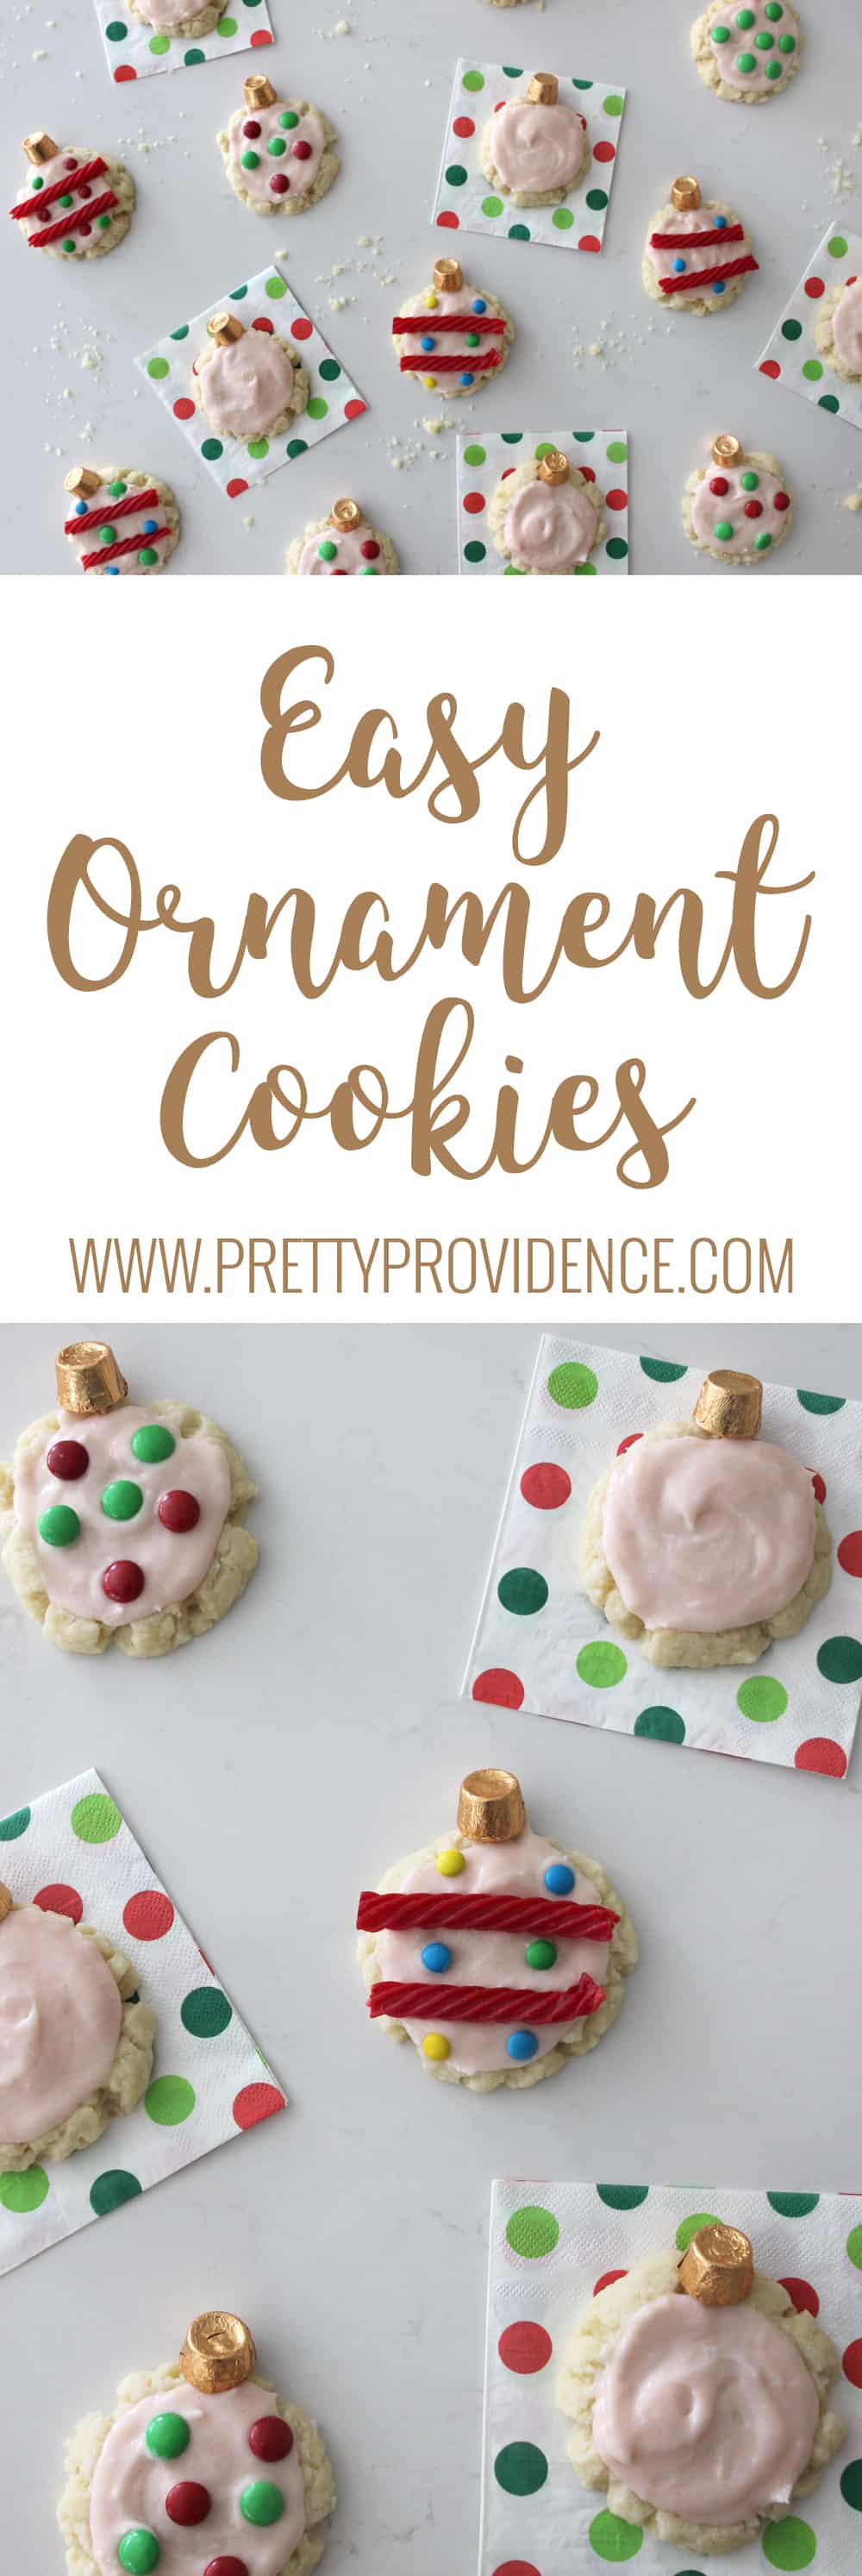 How fun are these easy Christmas ornament cookies?! Festive and delicious!